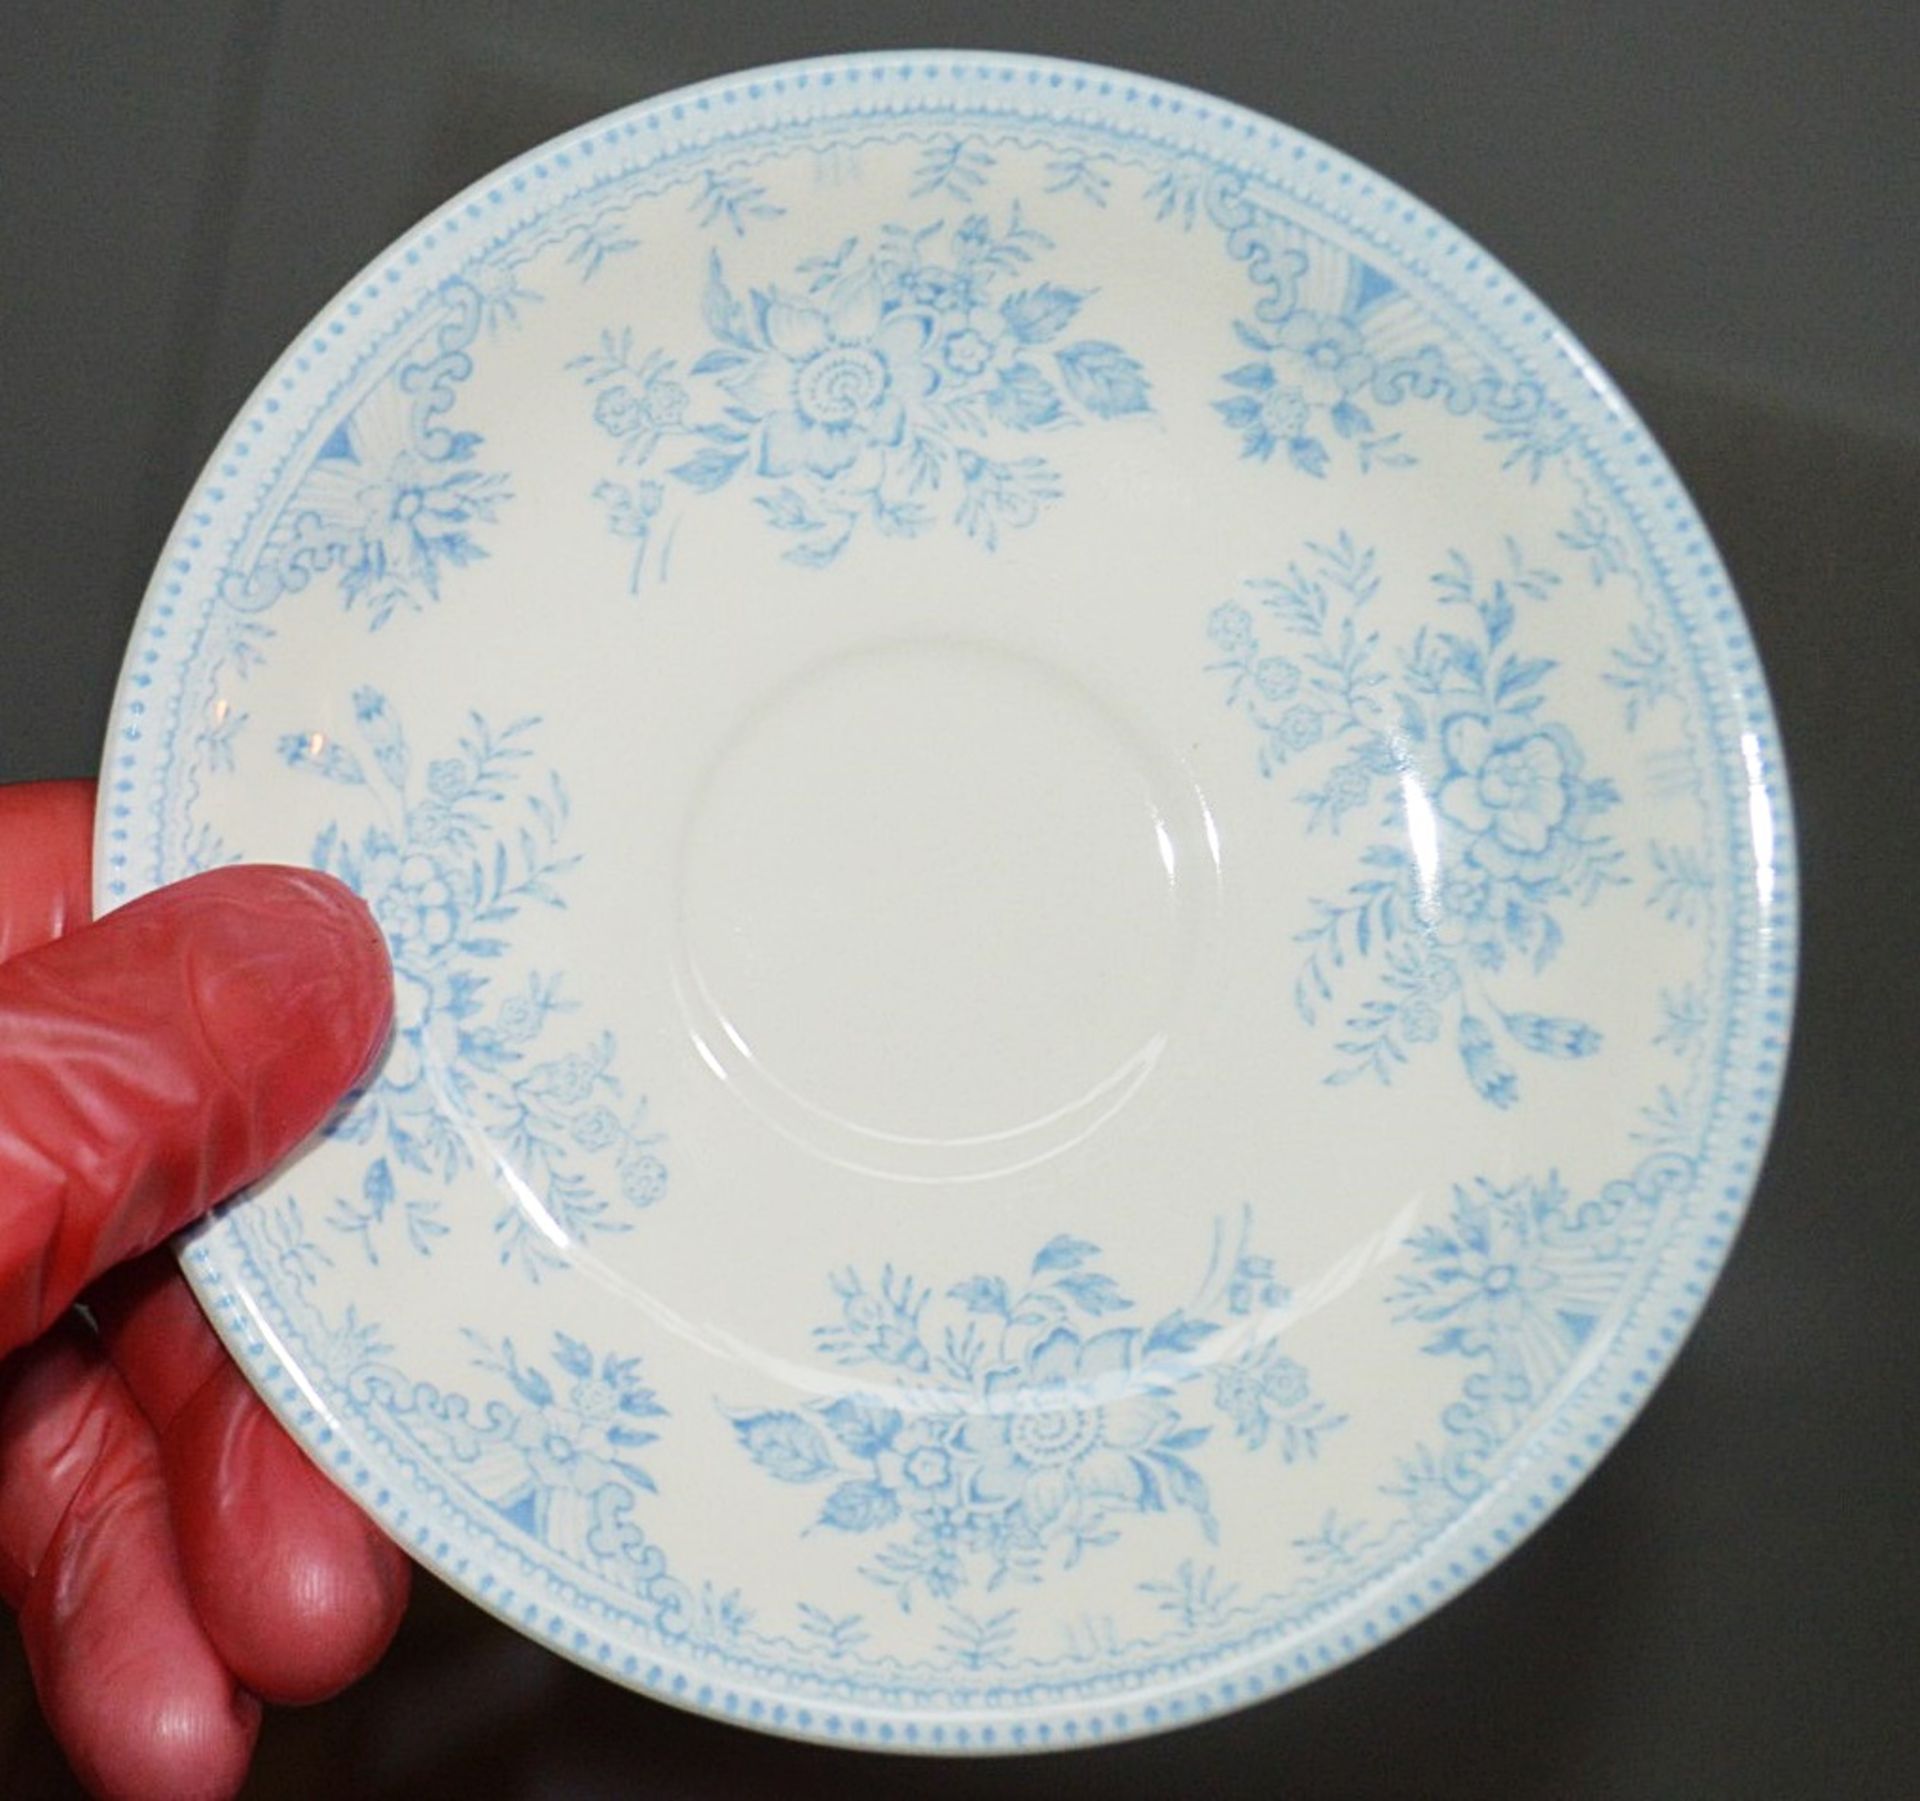 12 x BURLEIGH 'Blue Asiatic Pheasants' Handmade Teacup-Saucers - Unboxed Stock - Ref: HHW211-212/ - Image 2 of 5